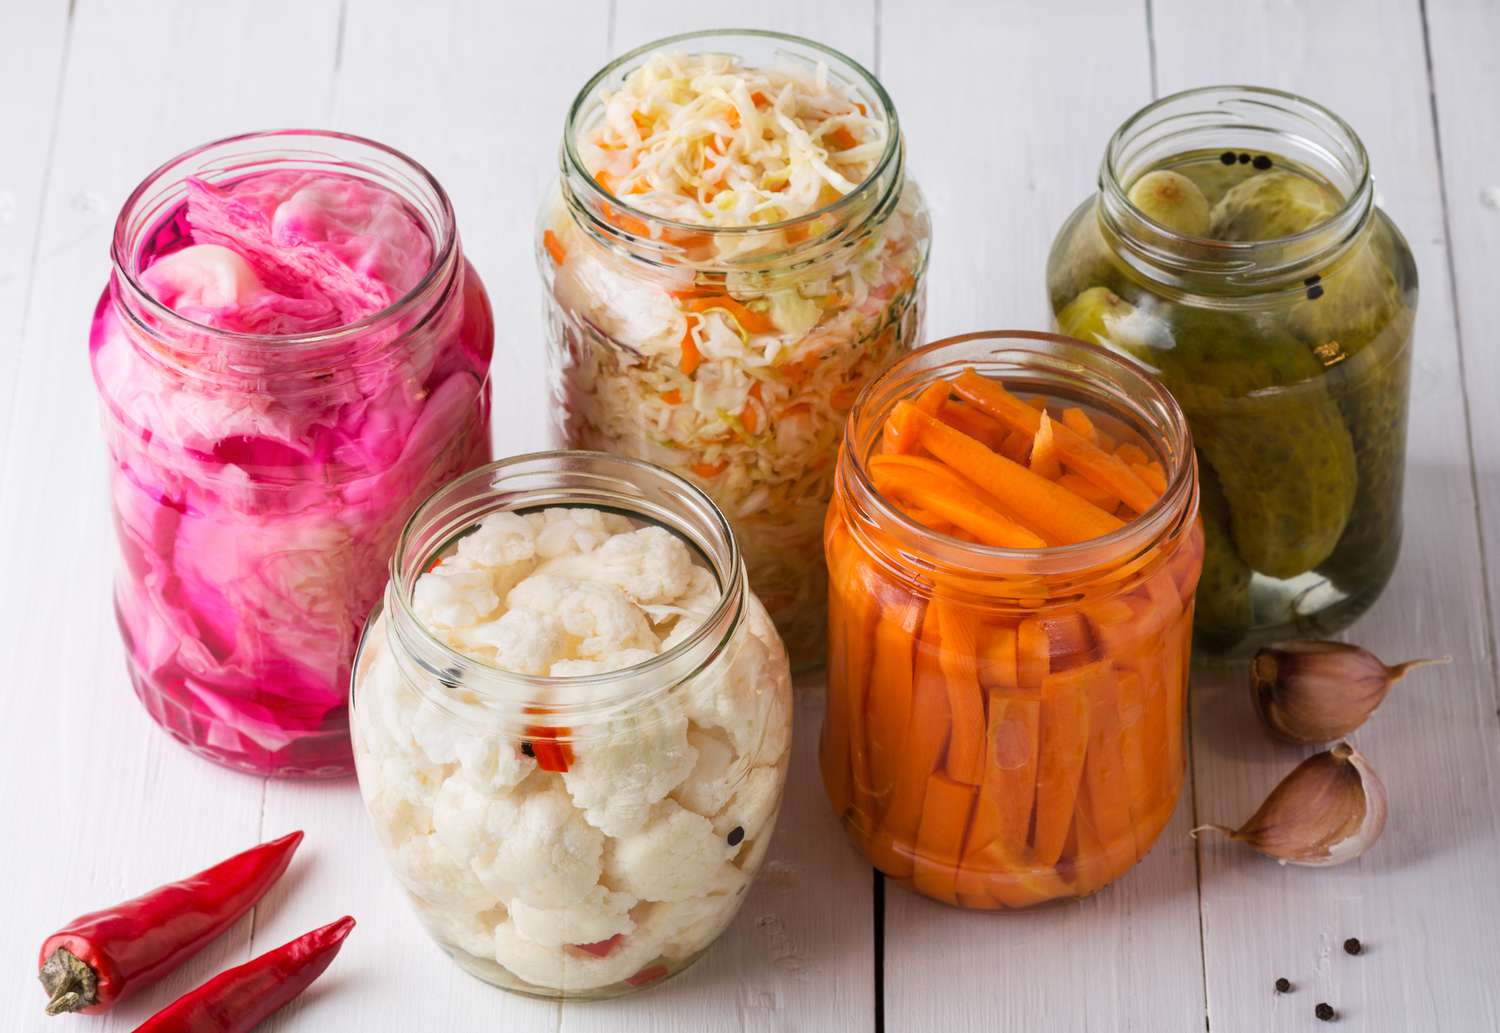 How To Store Fermented Vegetables